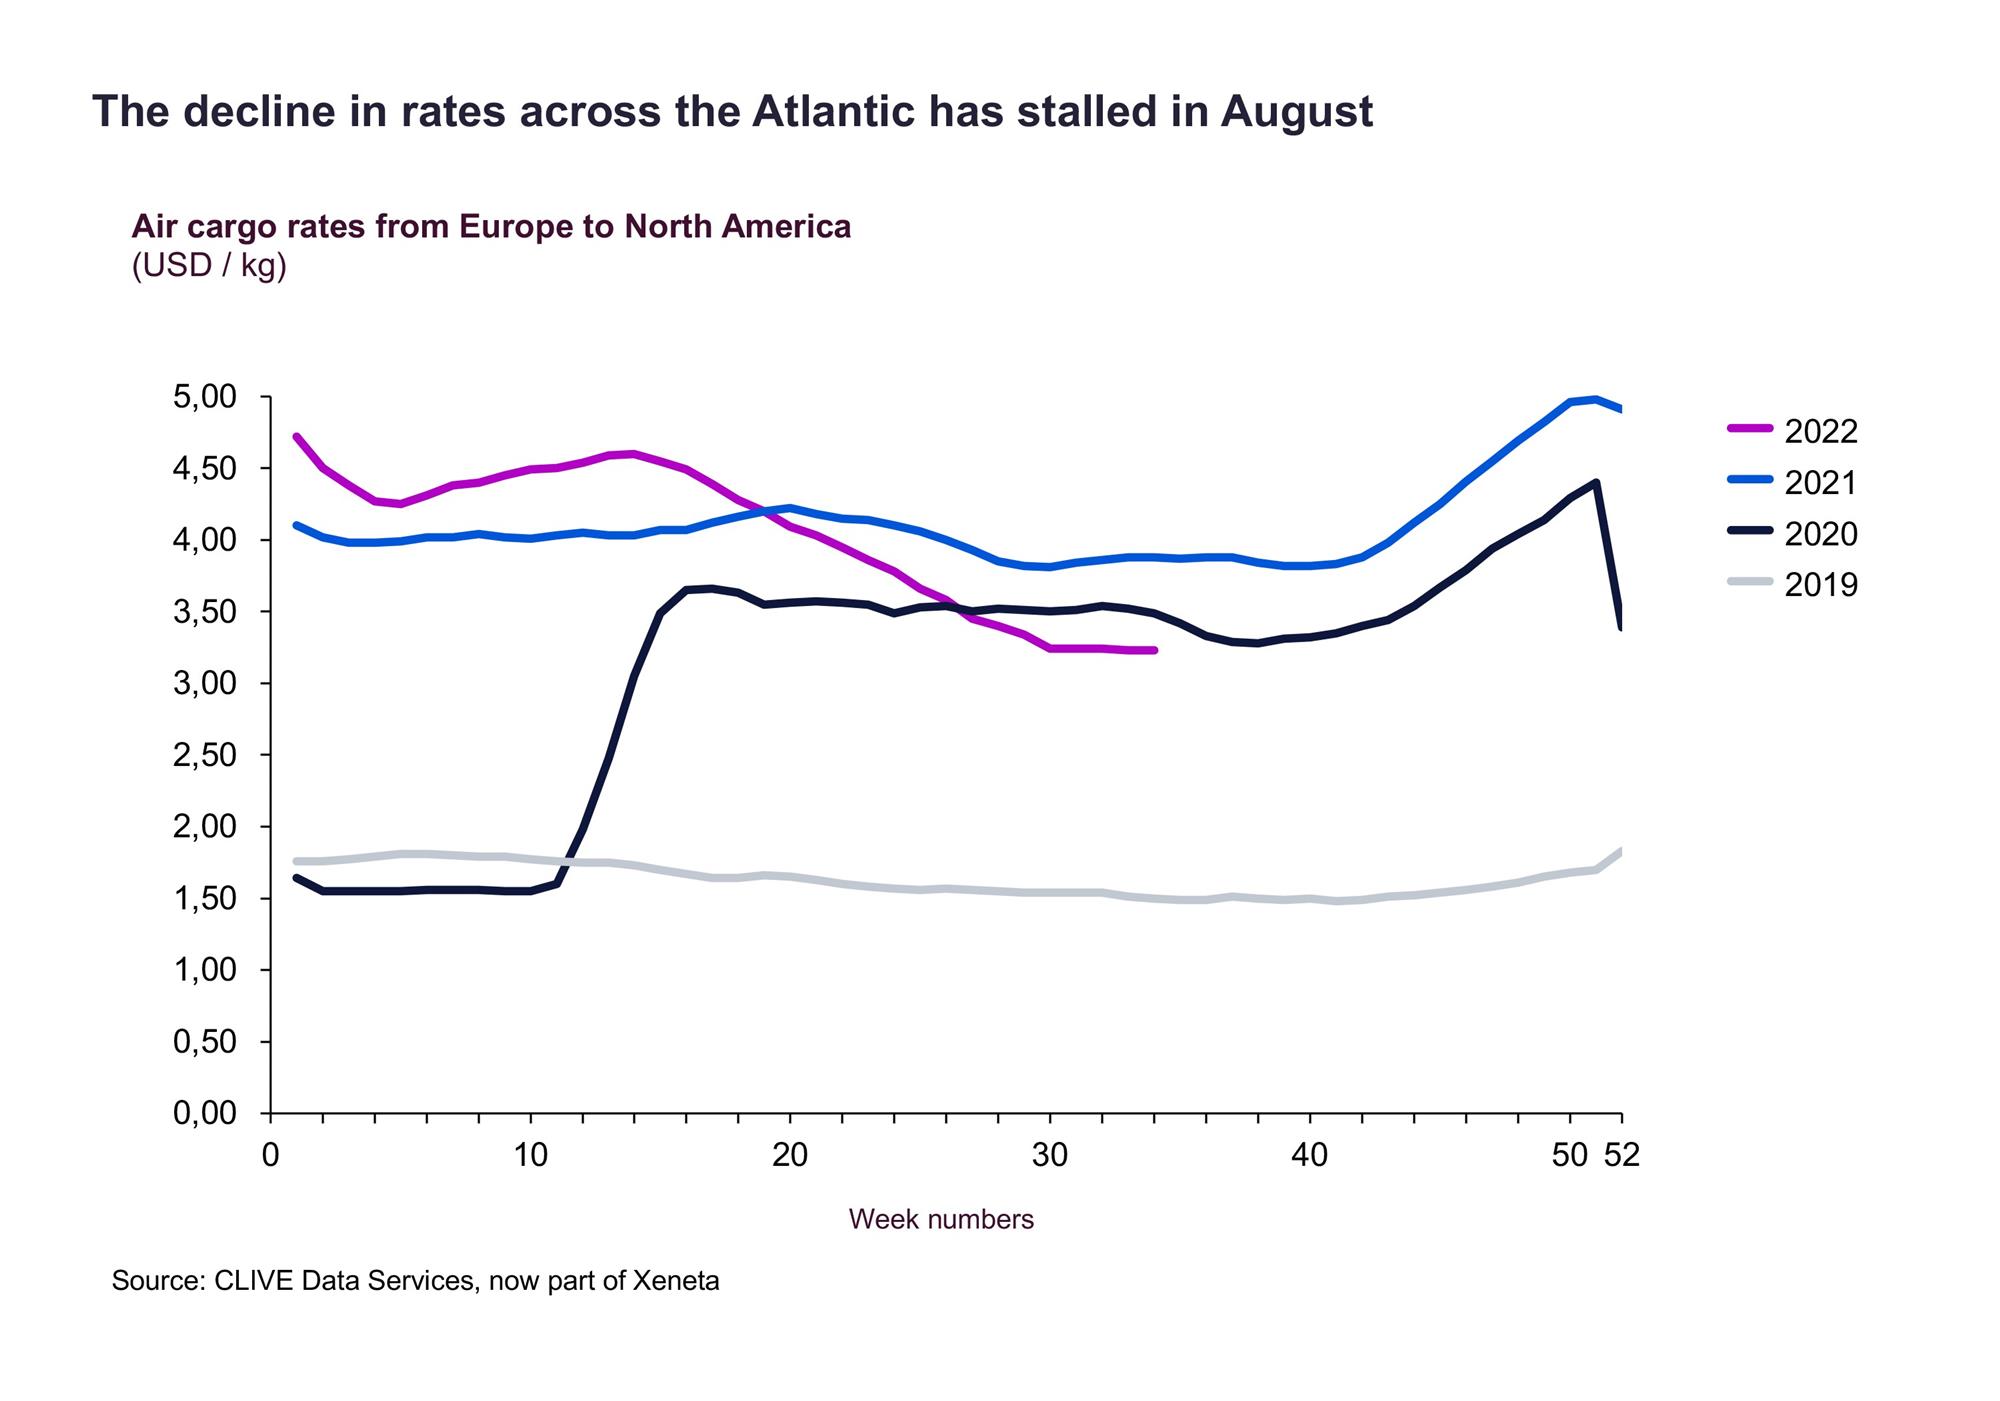 Self Photos / Files - The decline in rates across the Atlantic has stalled in August